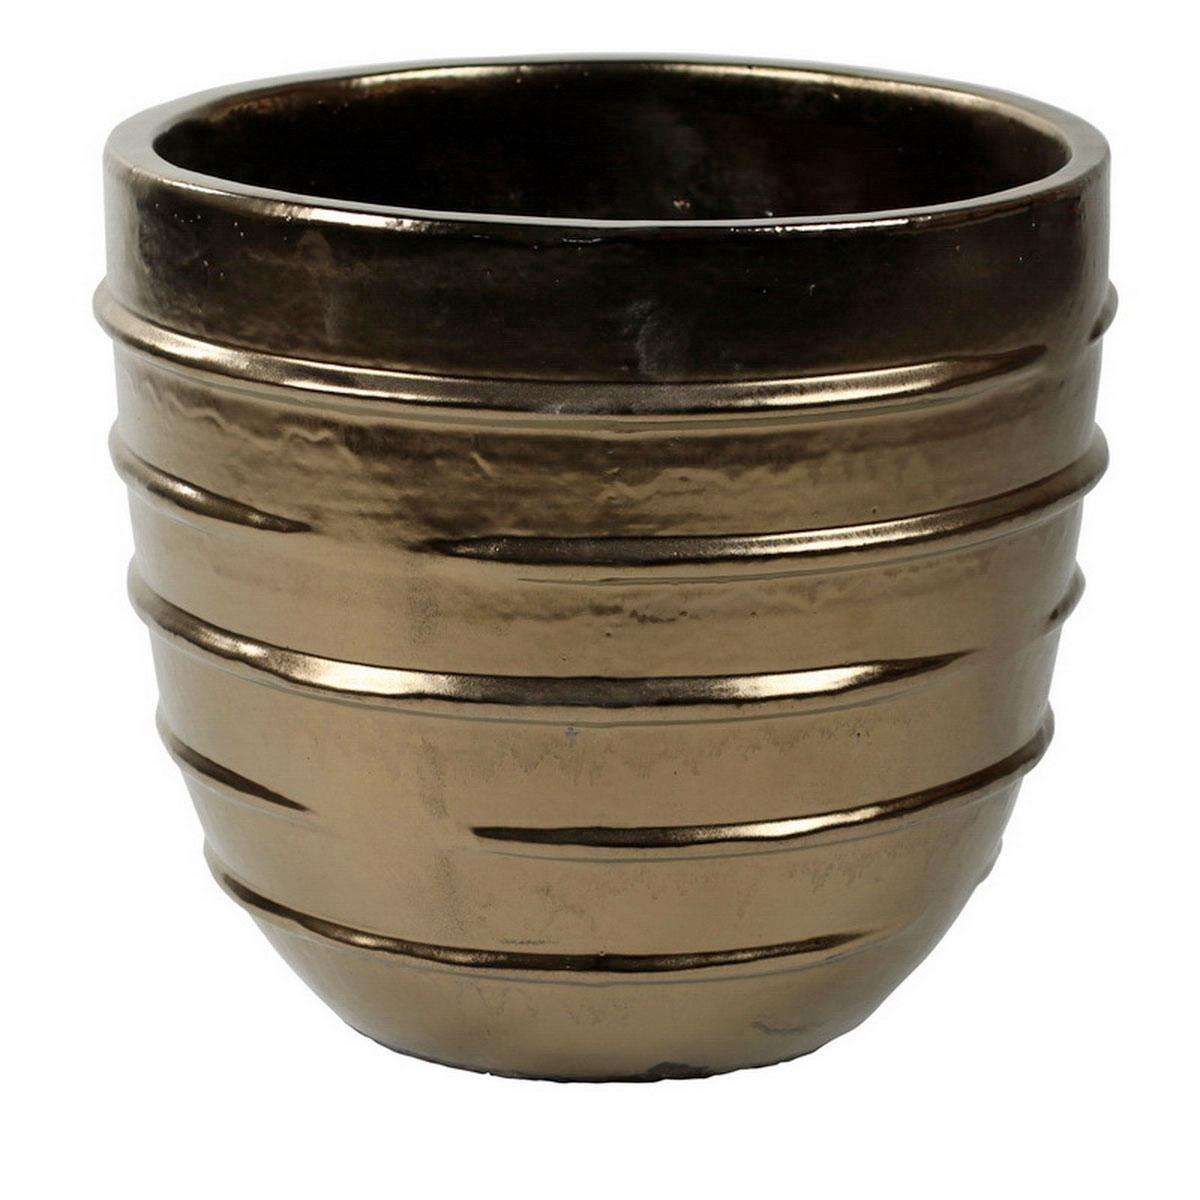 Ceramic Round Circular Glossy Planter Pot In/Out